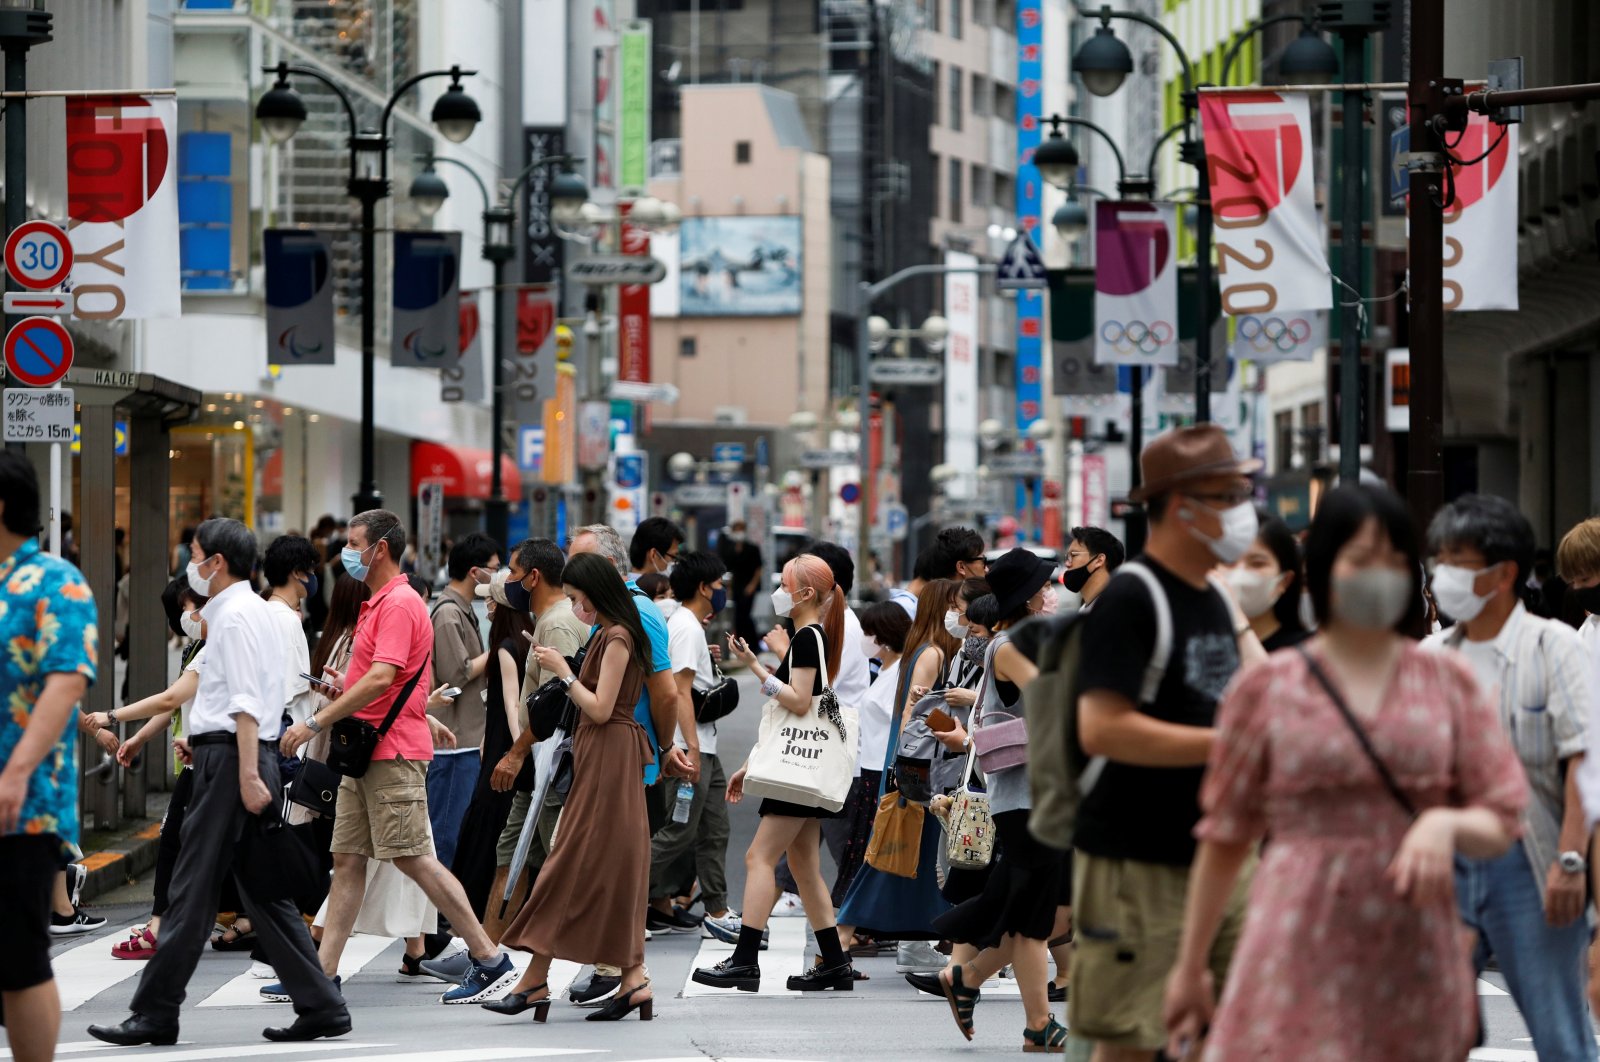 People walk at a crossing in the Shibuya shopping area, amid the COVID-19 outbreak in Tokyo, Japan, Aug. 7, 2021. (Reuters Photo)